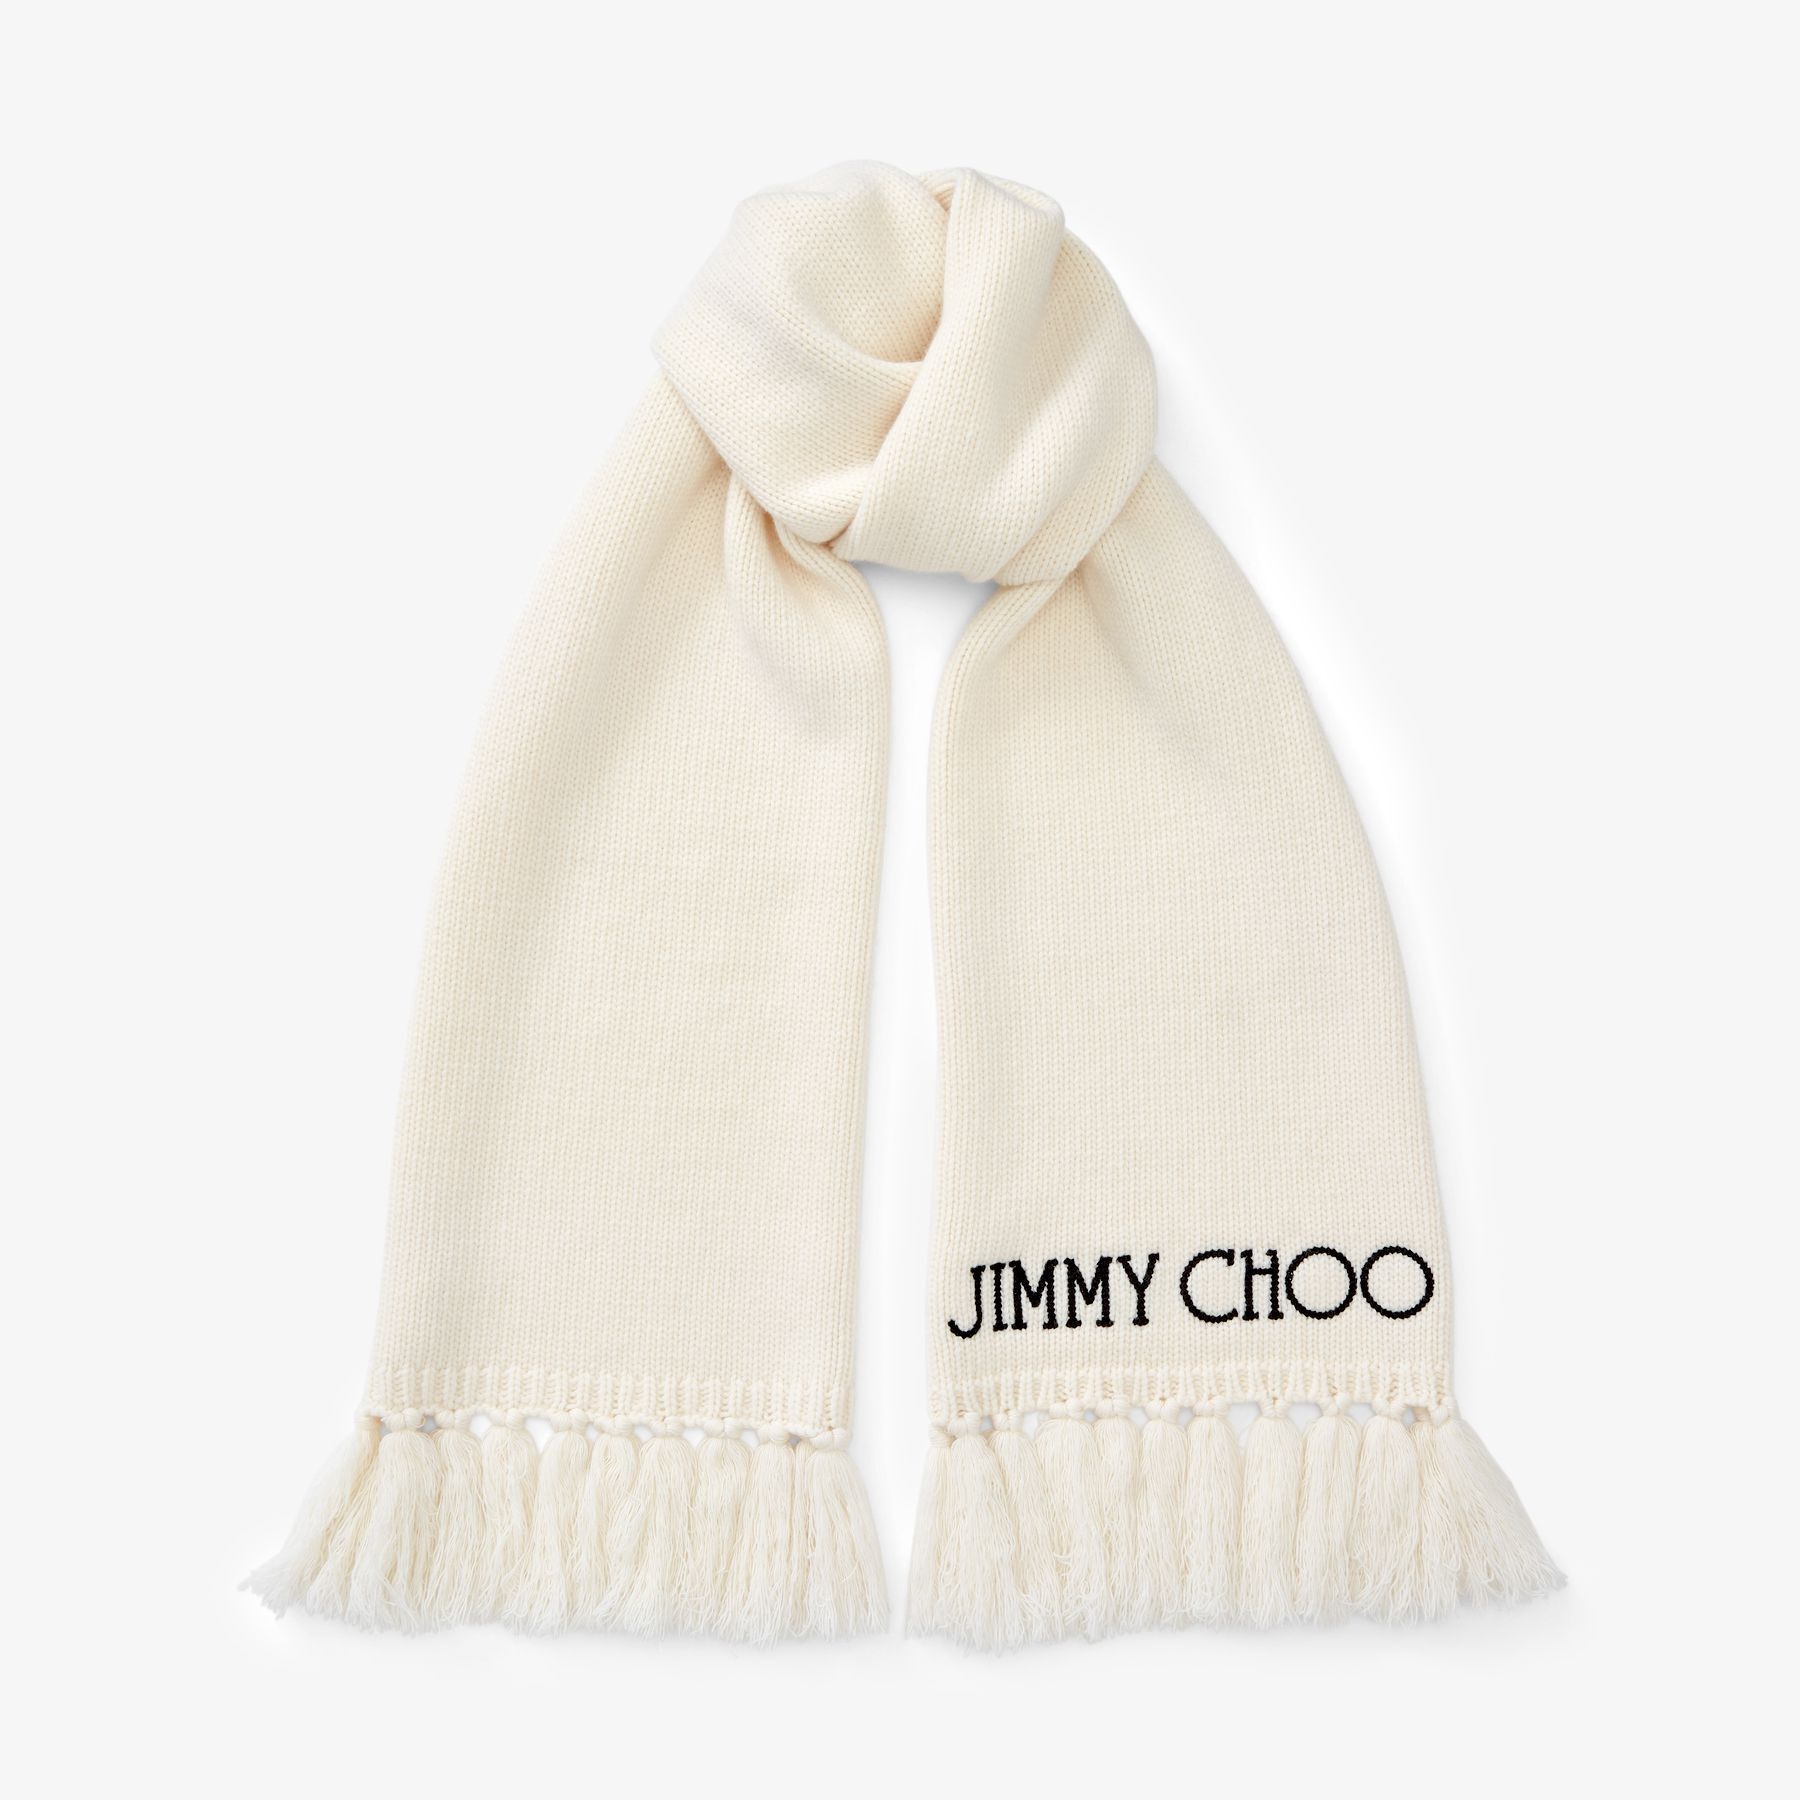 Jutta
Latte Wool Scarf with Embroidered Jimmy Choo Logo - 1